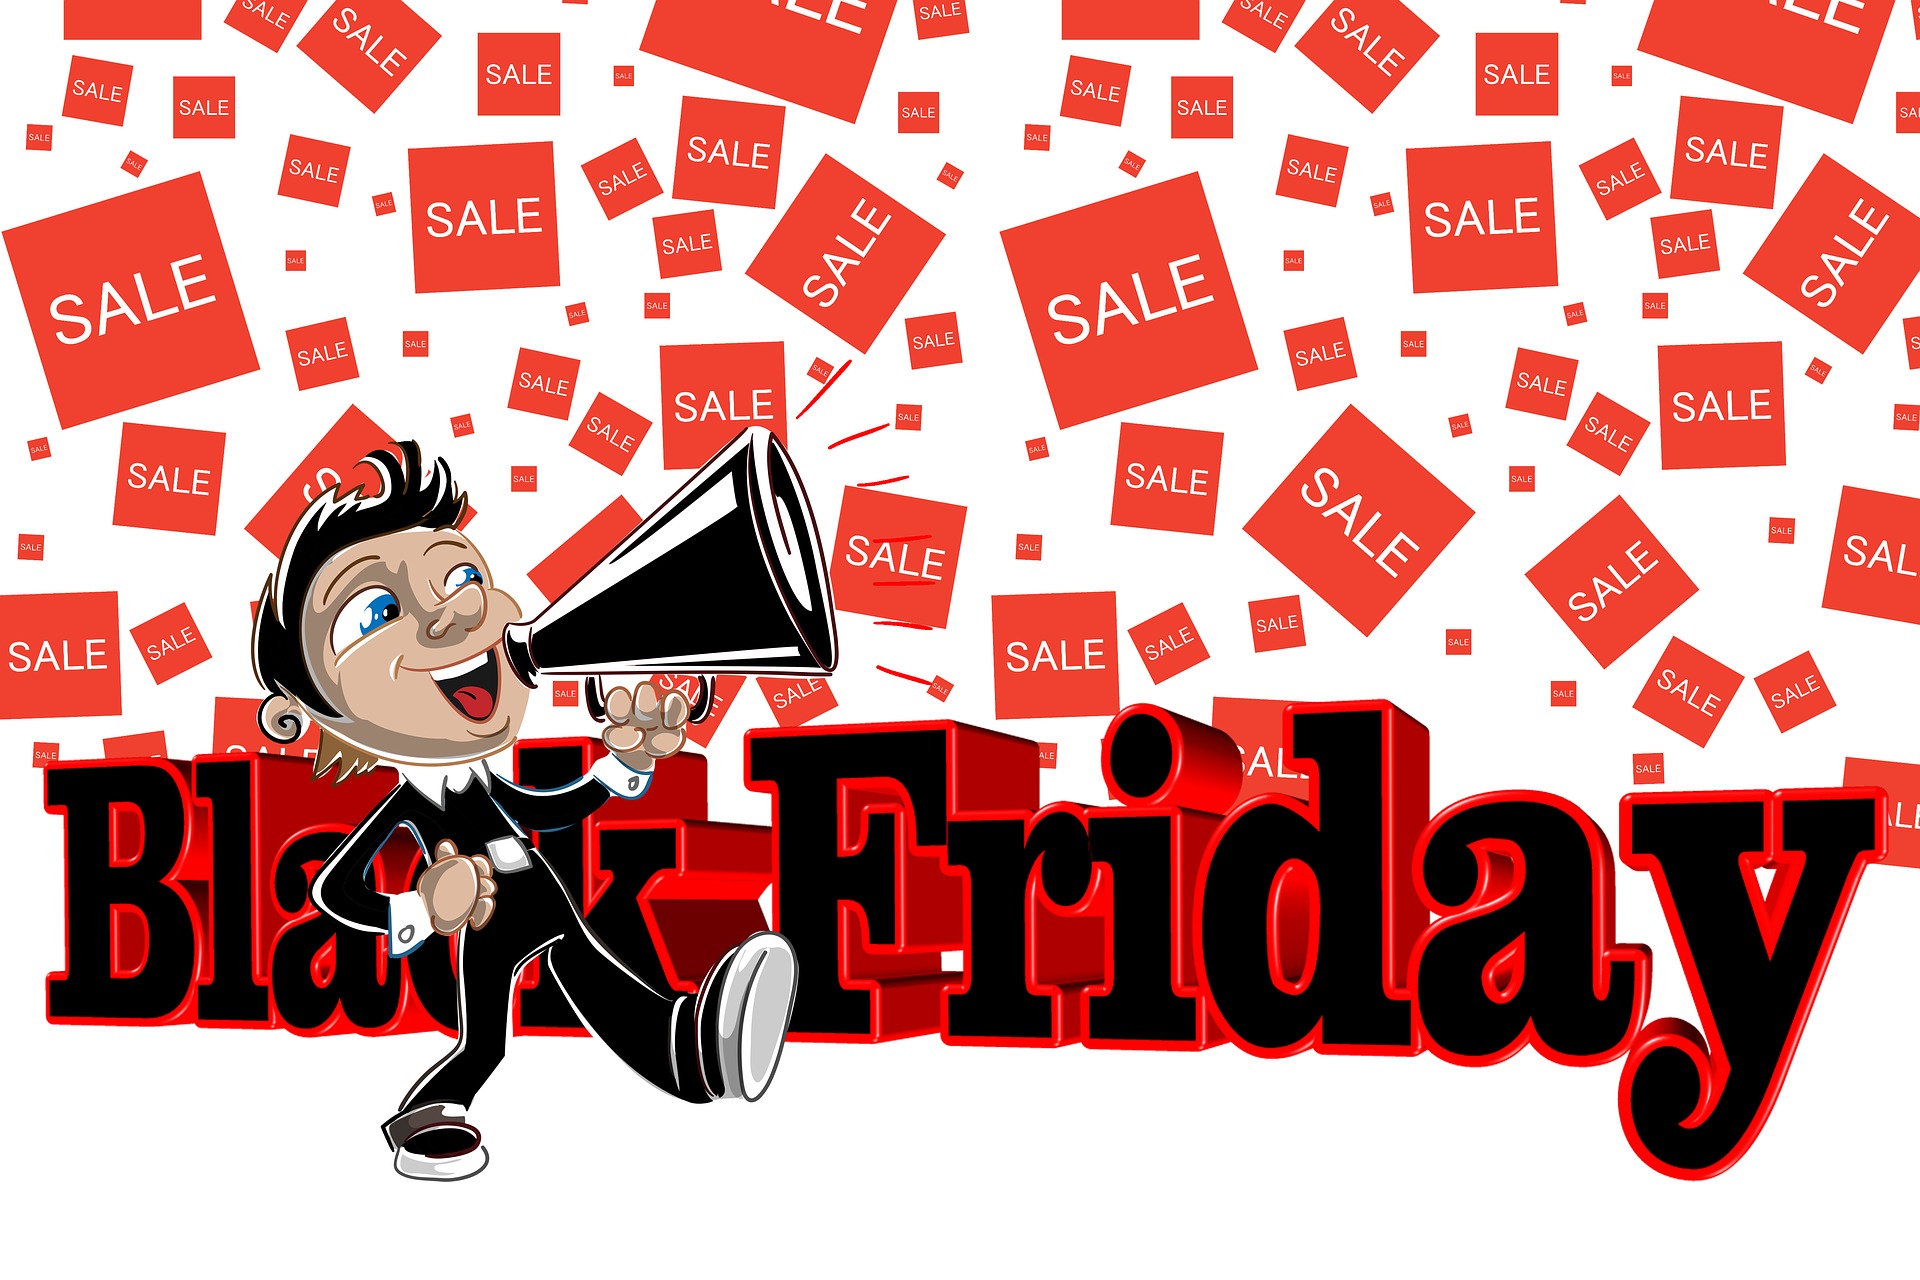 Black Friday: What Does the Ever-Popular Consumer Holiday Mean for Retailers in Terms of Risks and Opportunities?